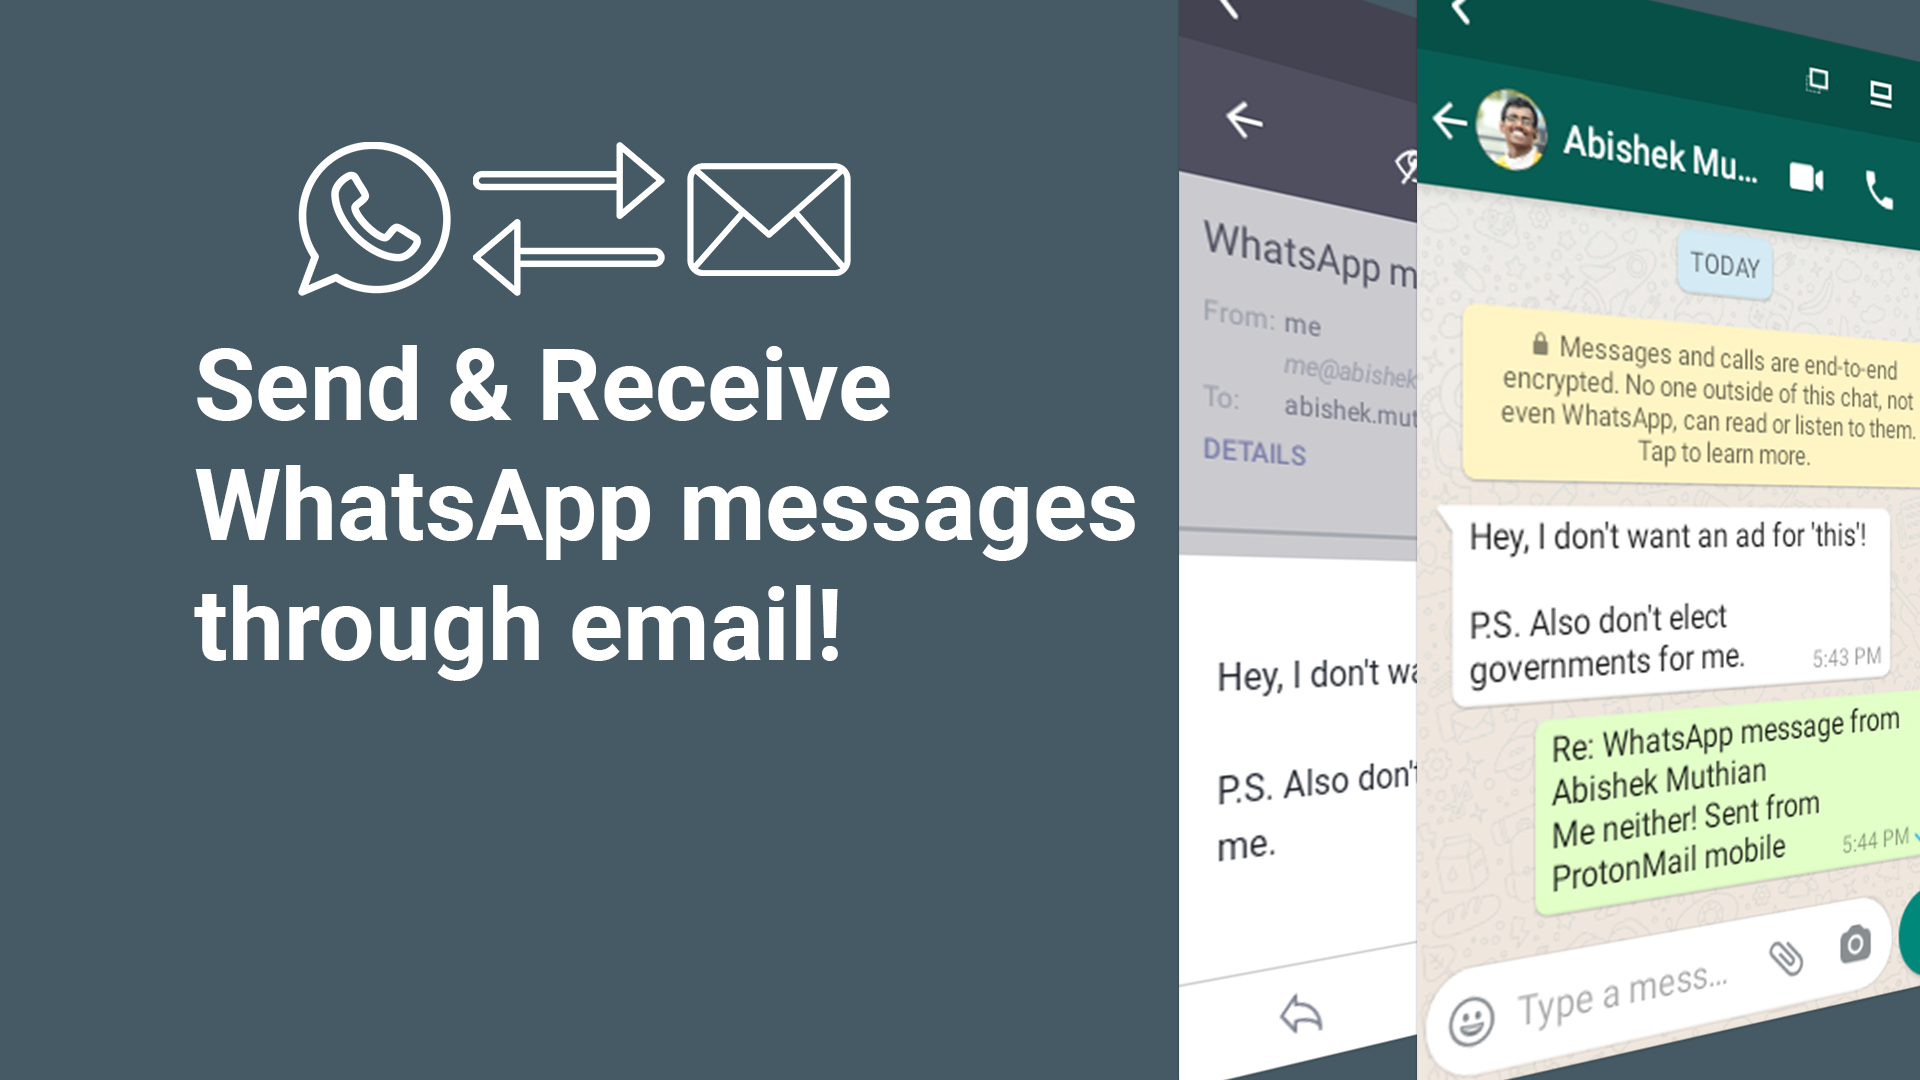 Send and Receive WhatsApp messages through email featured image